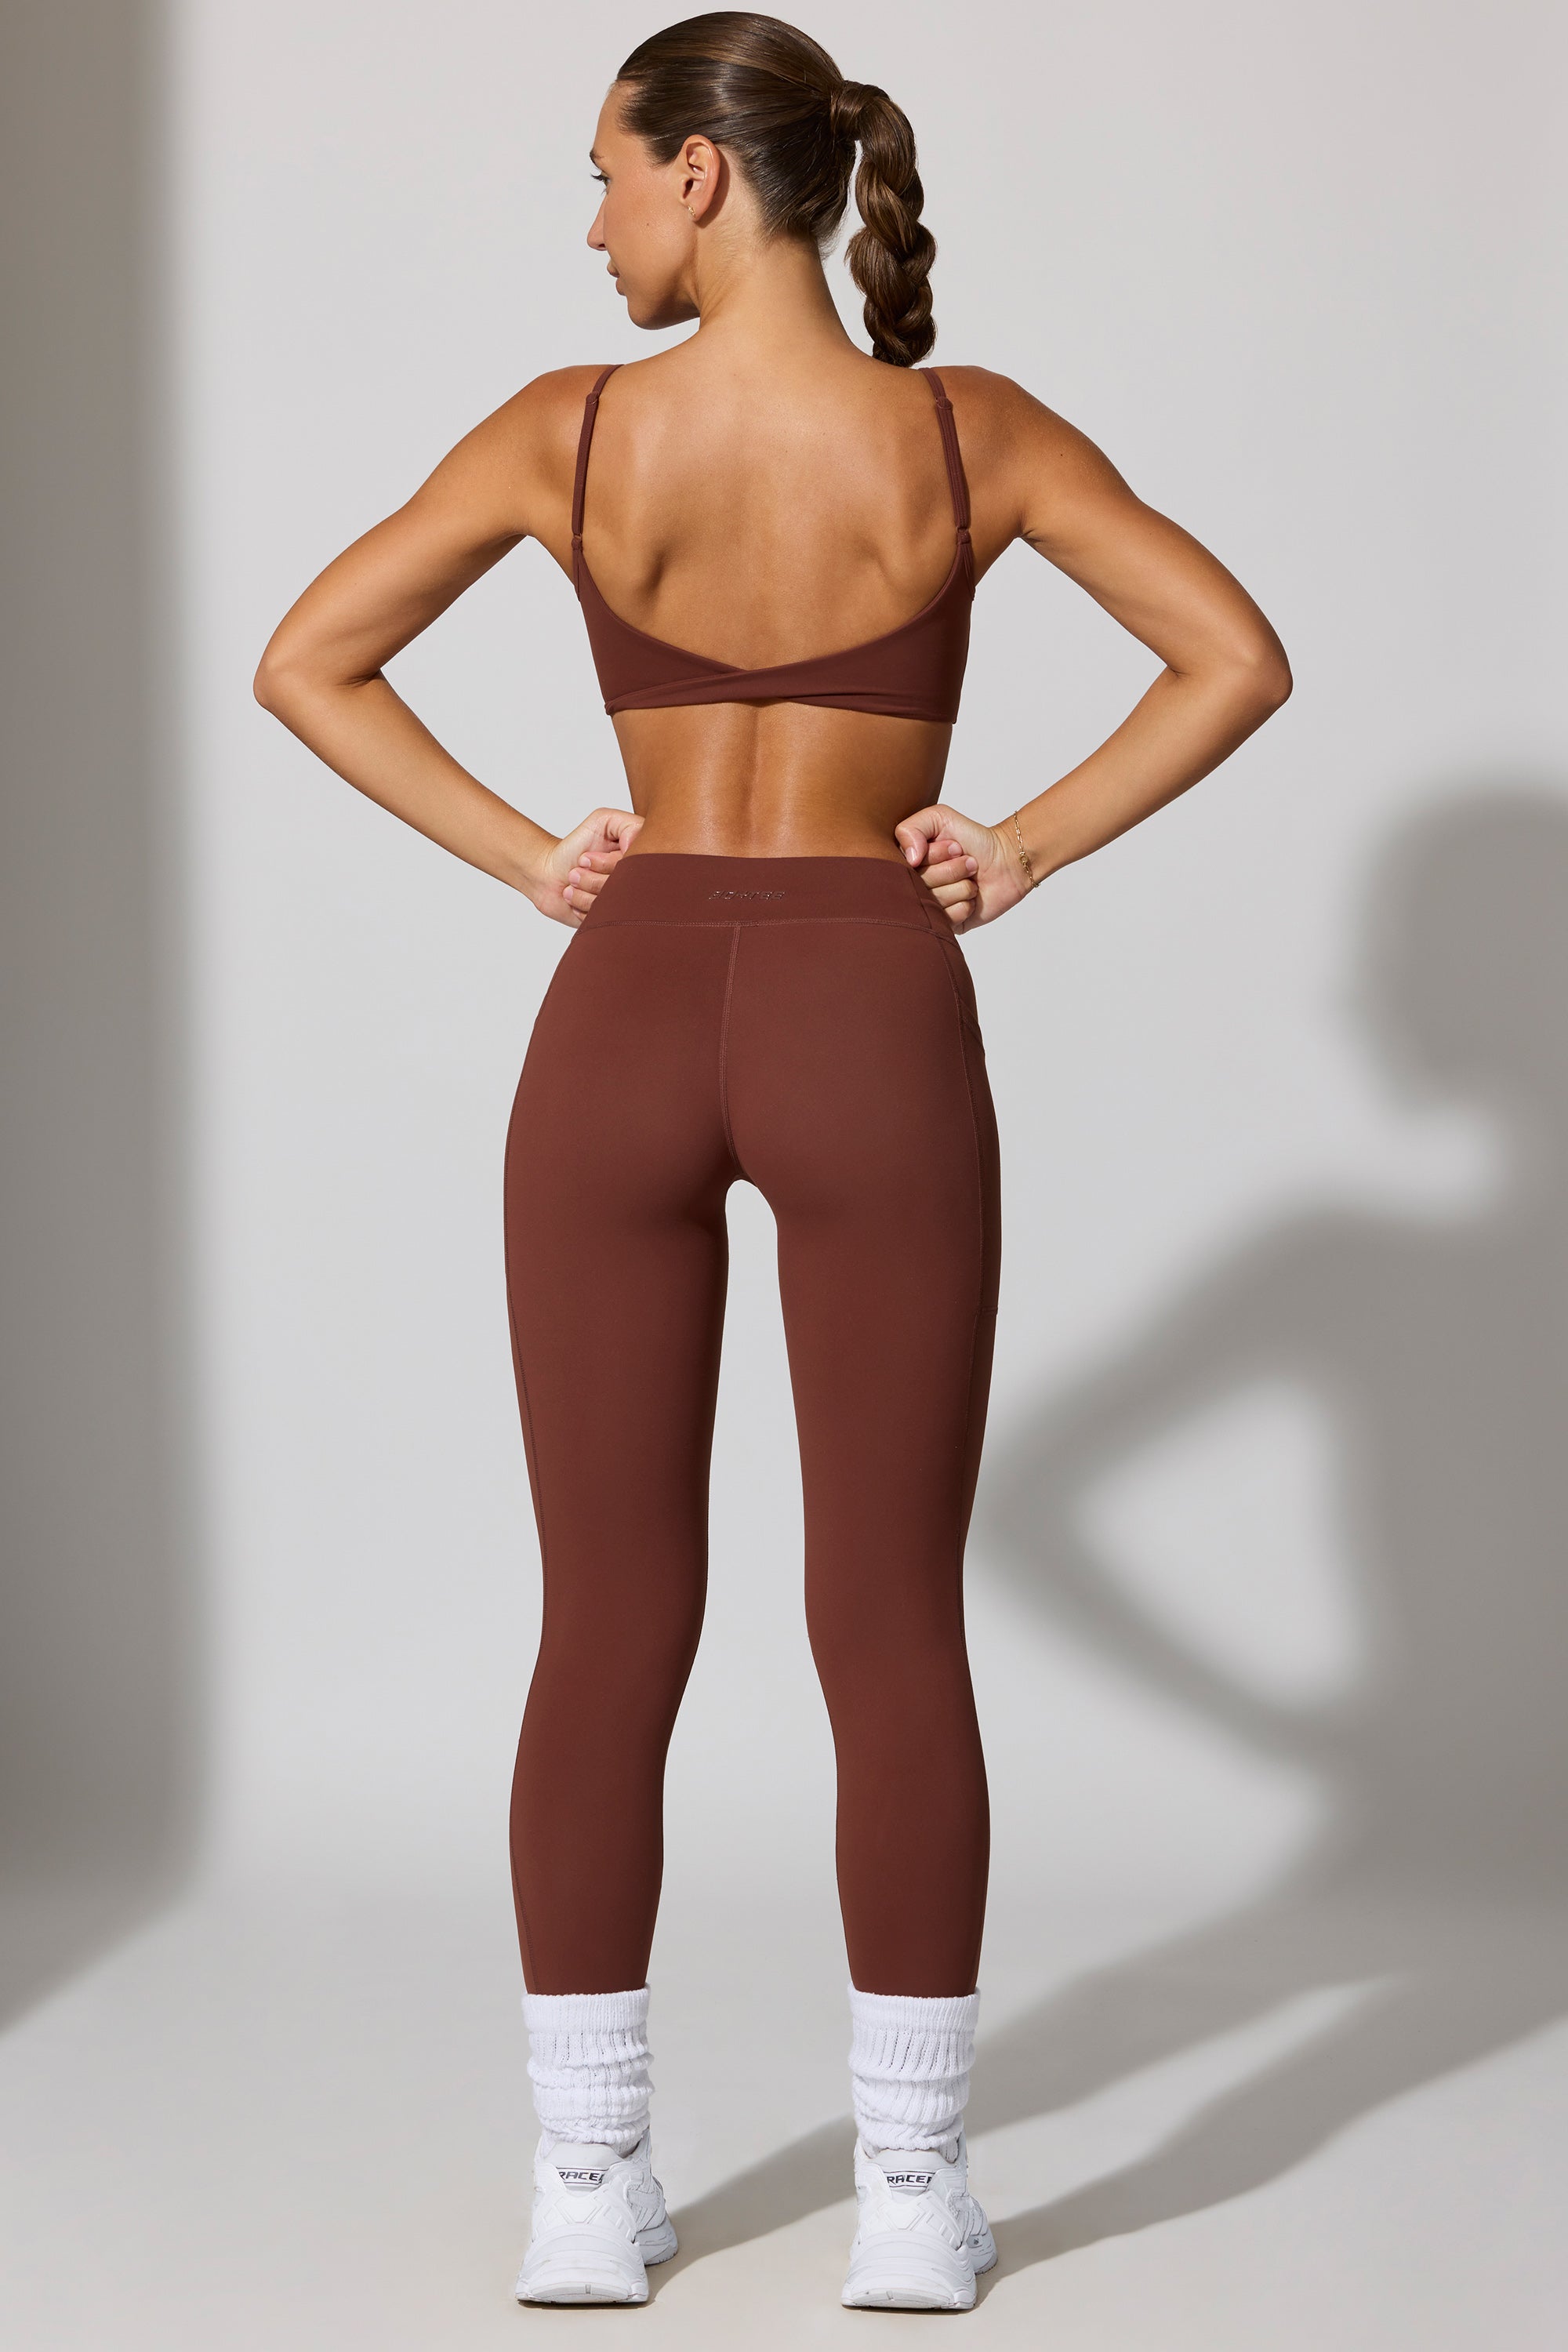 Change Petite Full Length Leggings with Pockets in Chocolate